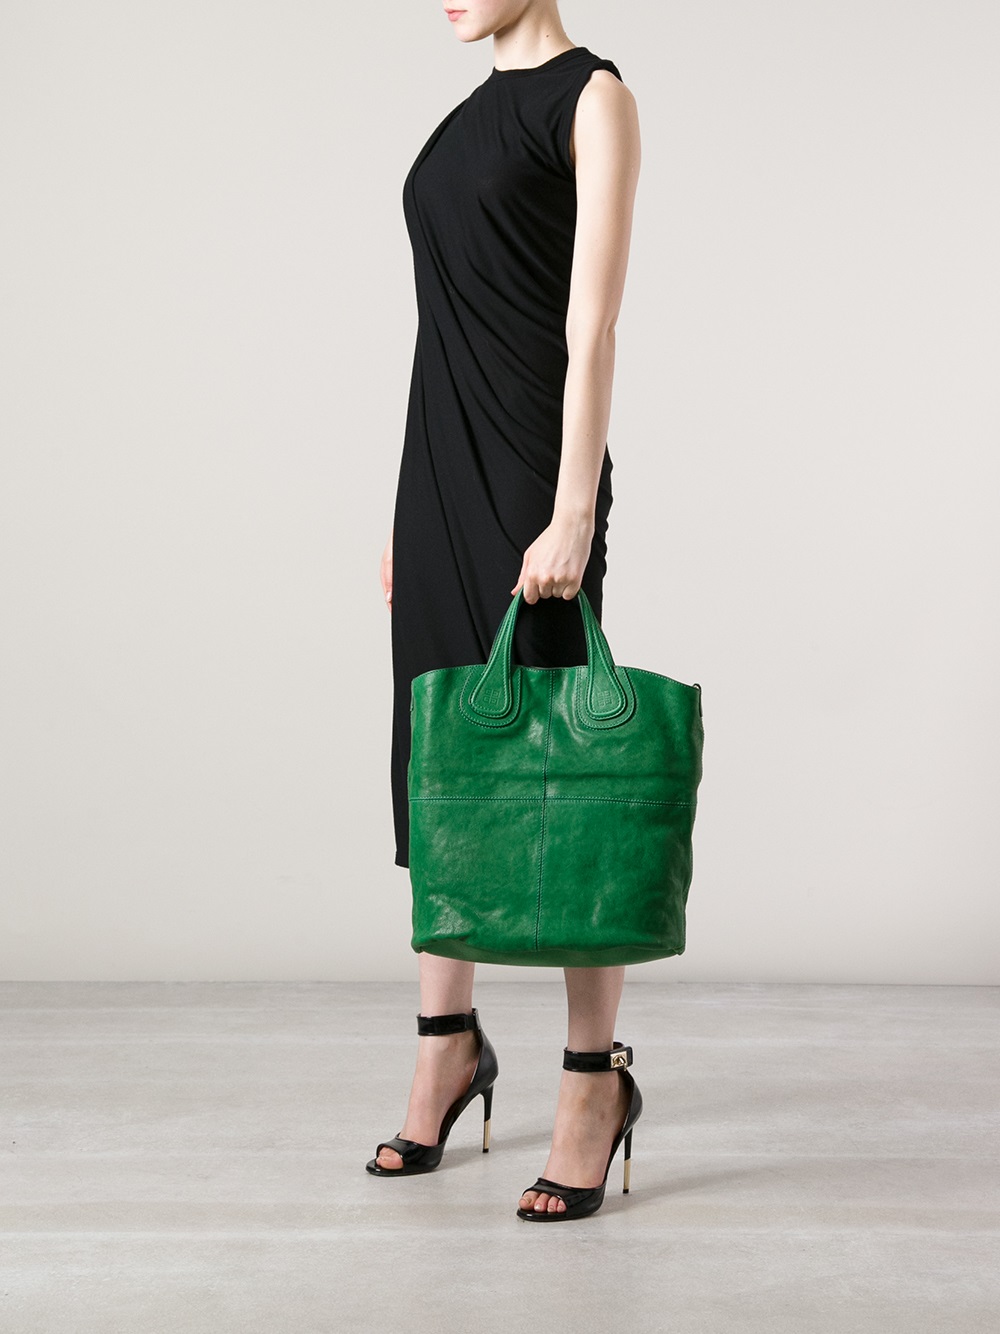 Givenchy Nightingale Large Shopping Tote in Green - Lyst